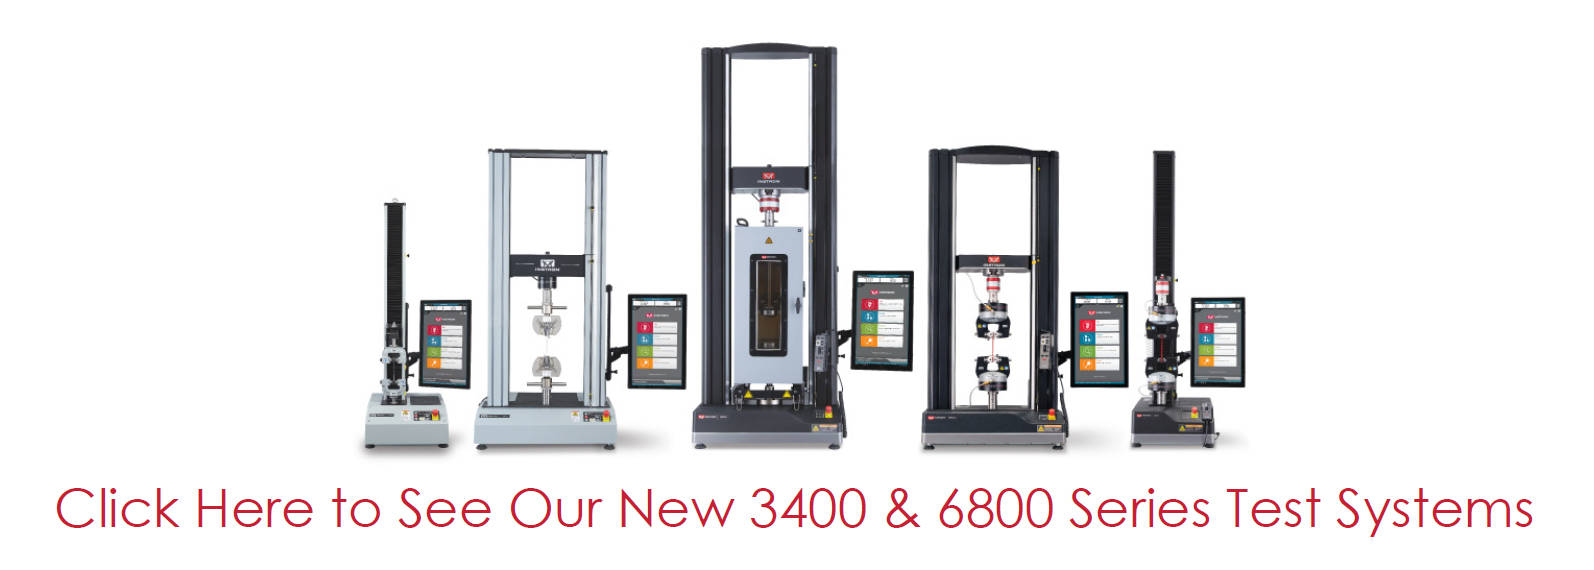 Click here to see our new 3400 and 6800 testing systems